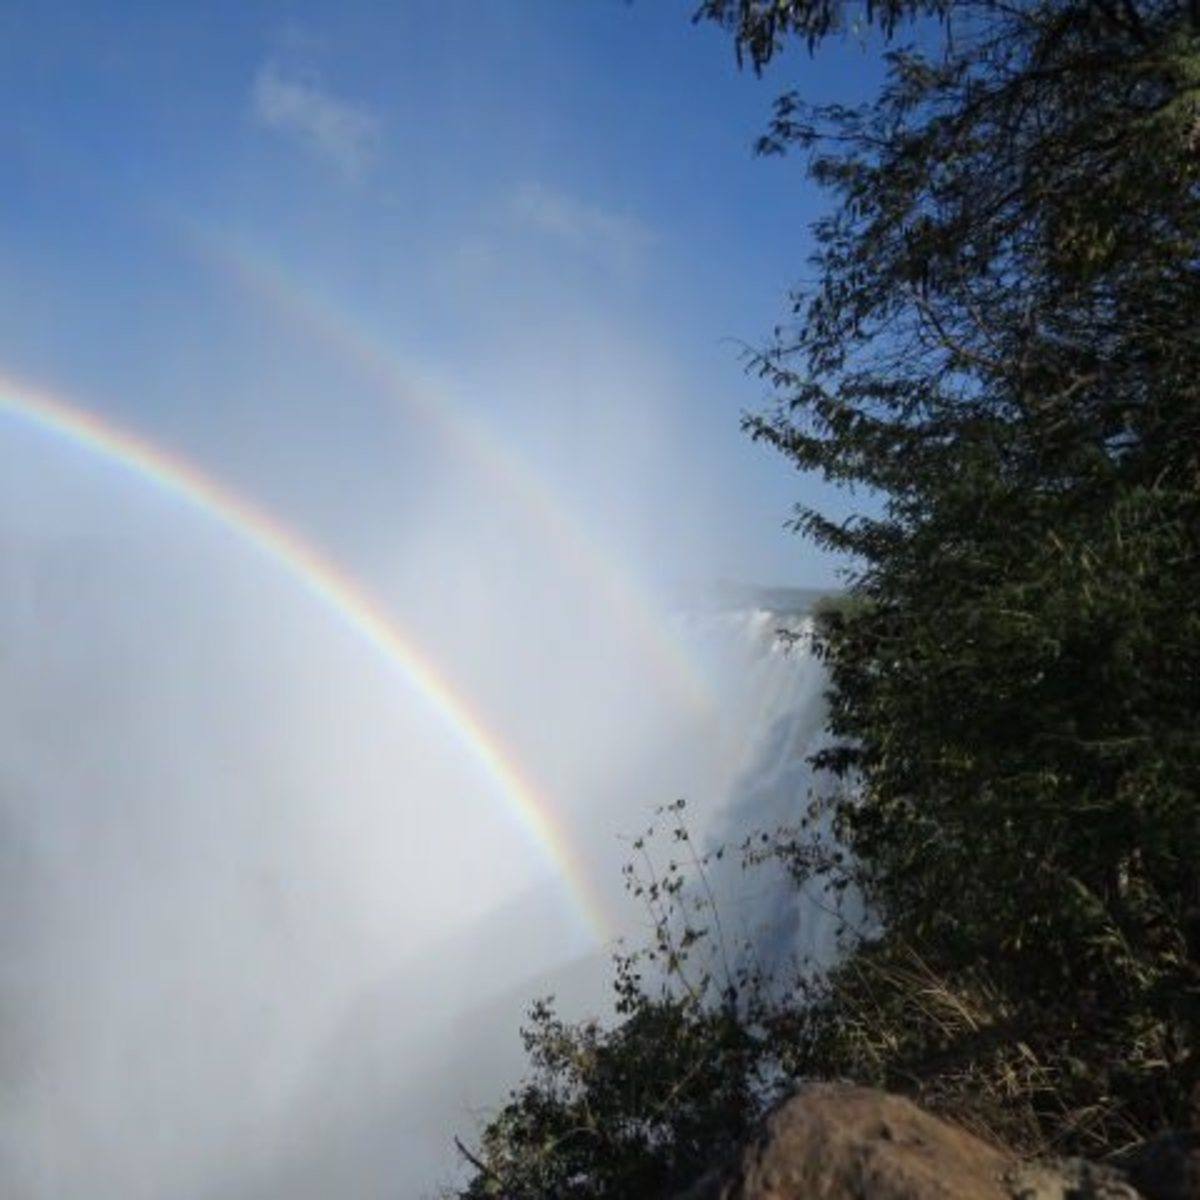 Beautiful Rainbows from the Mist Refraction